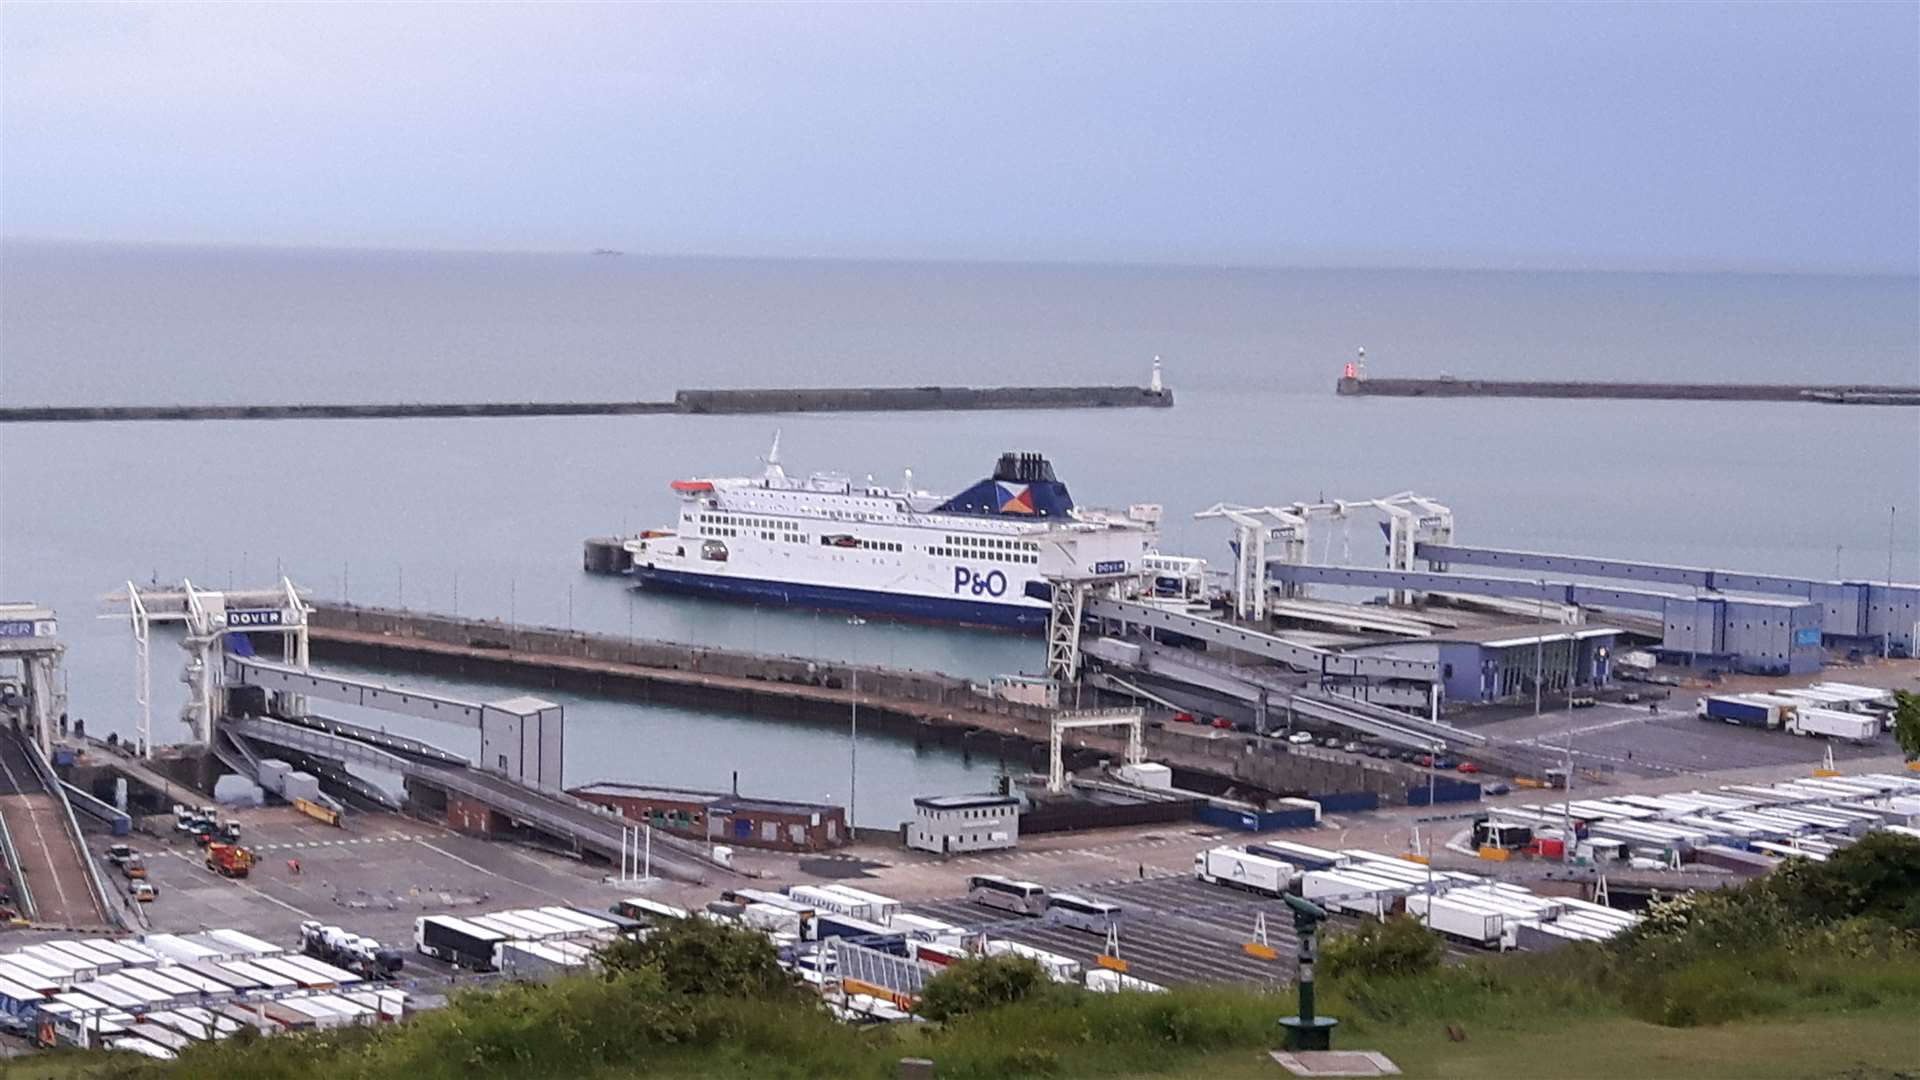 Ferry crossings will significantly decrease from Dover Eastern Docks as P&O lays up four vessels furloughing an extra 300 staff